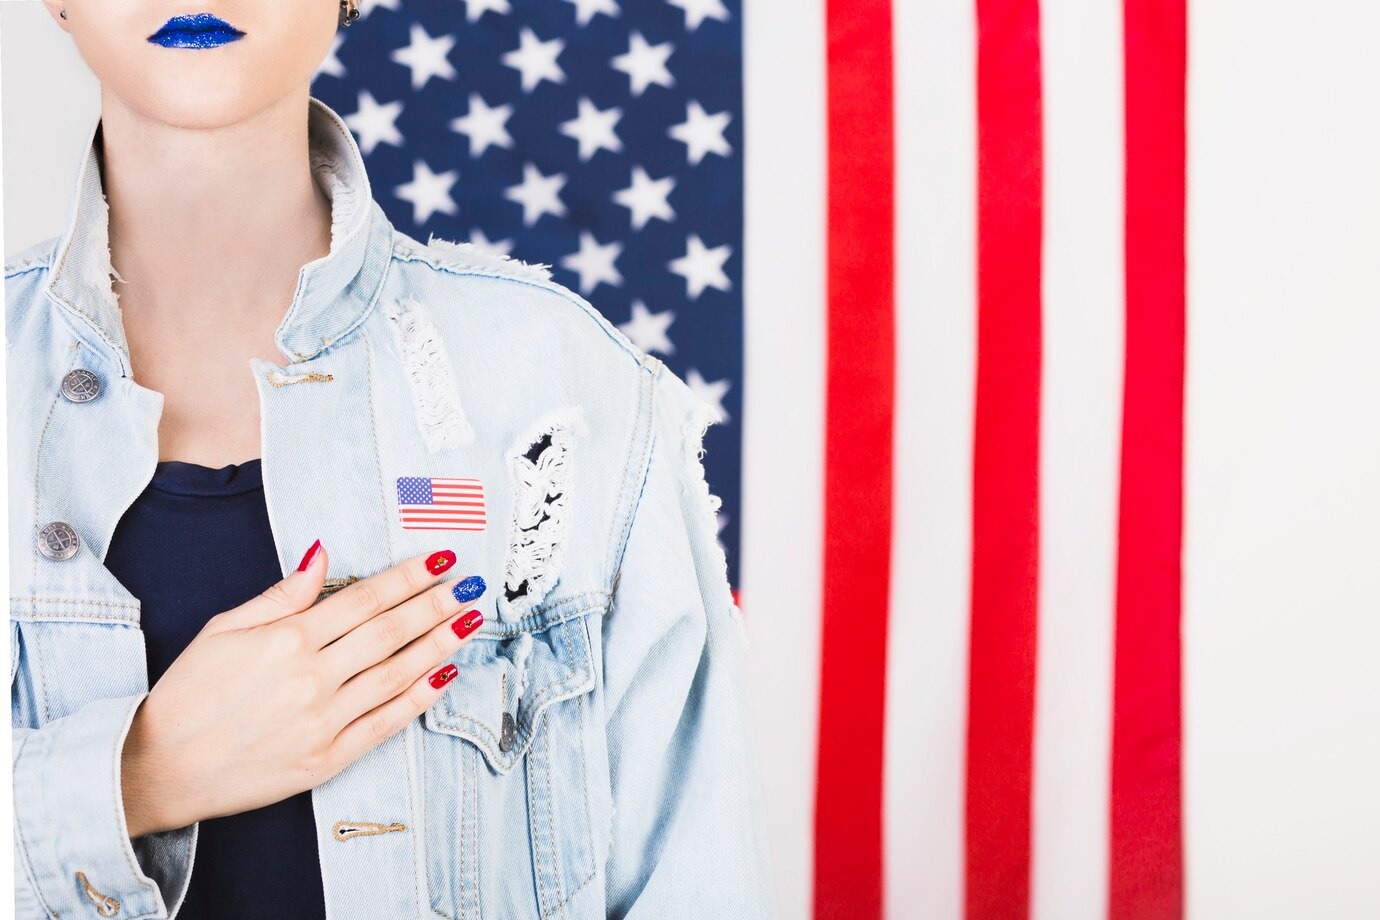 online-promotion-ideas-for-nail,-hair,-and-beauty-salons-for-july-4th